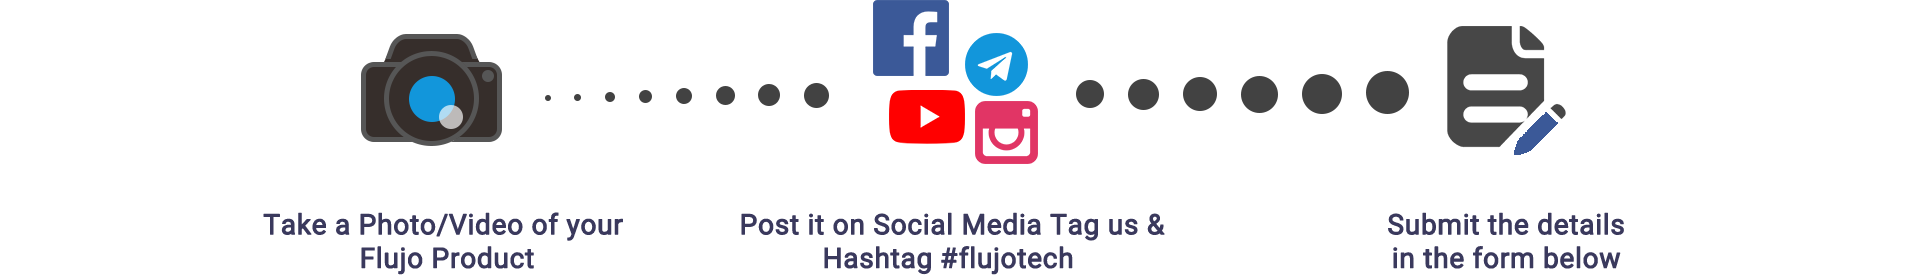 Step-by-step graphic instructions for customers to share photos or videos of their Flujo products on social media, with icons representing different platforms and a prompt to submit details in a form